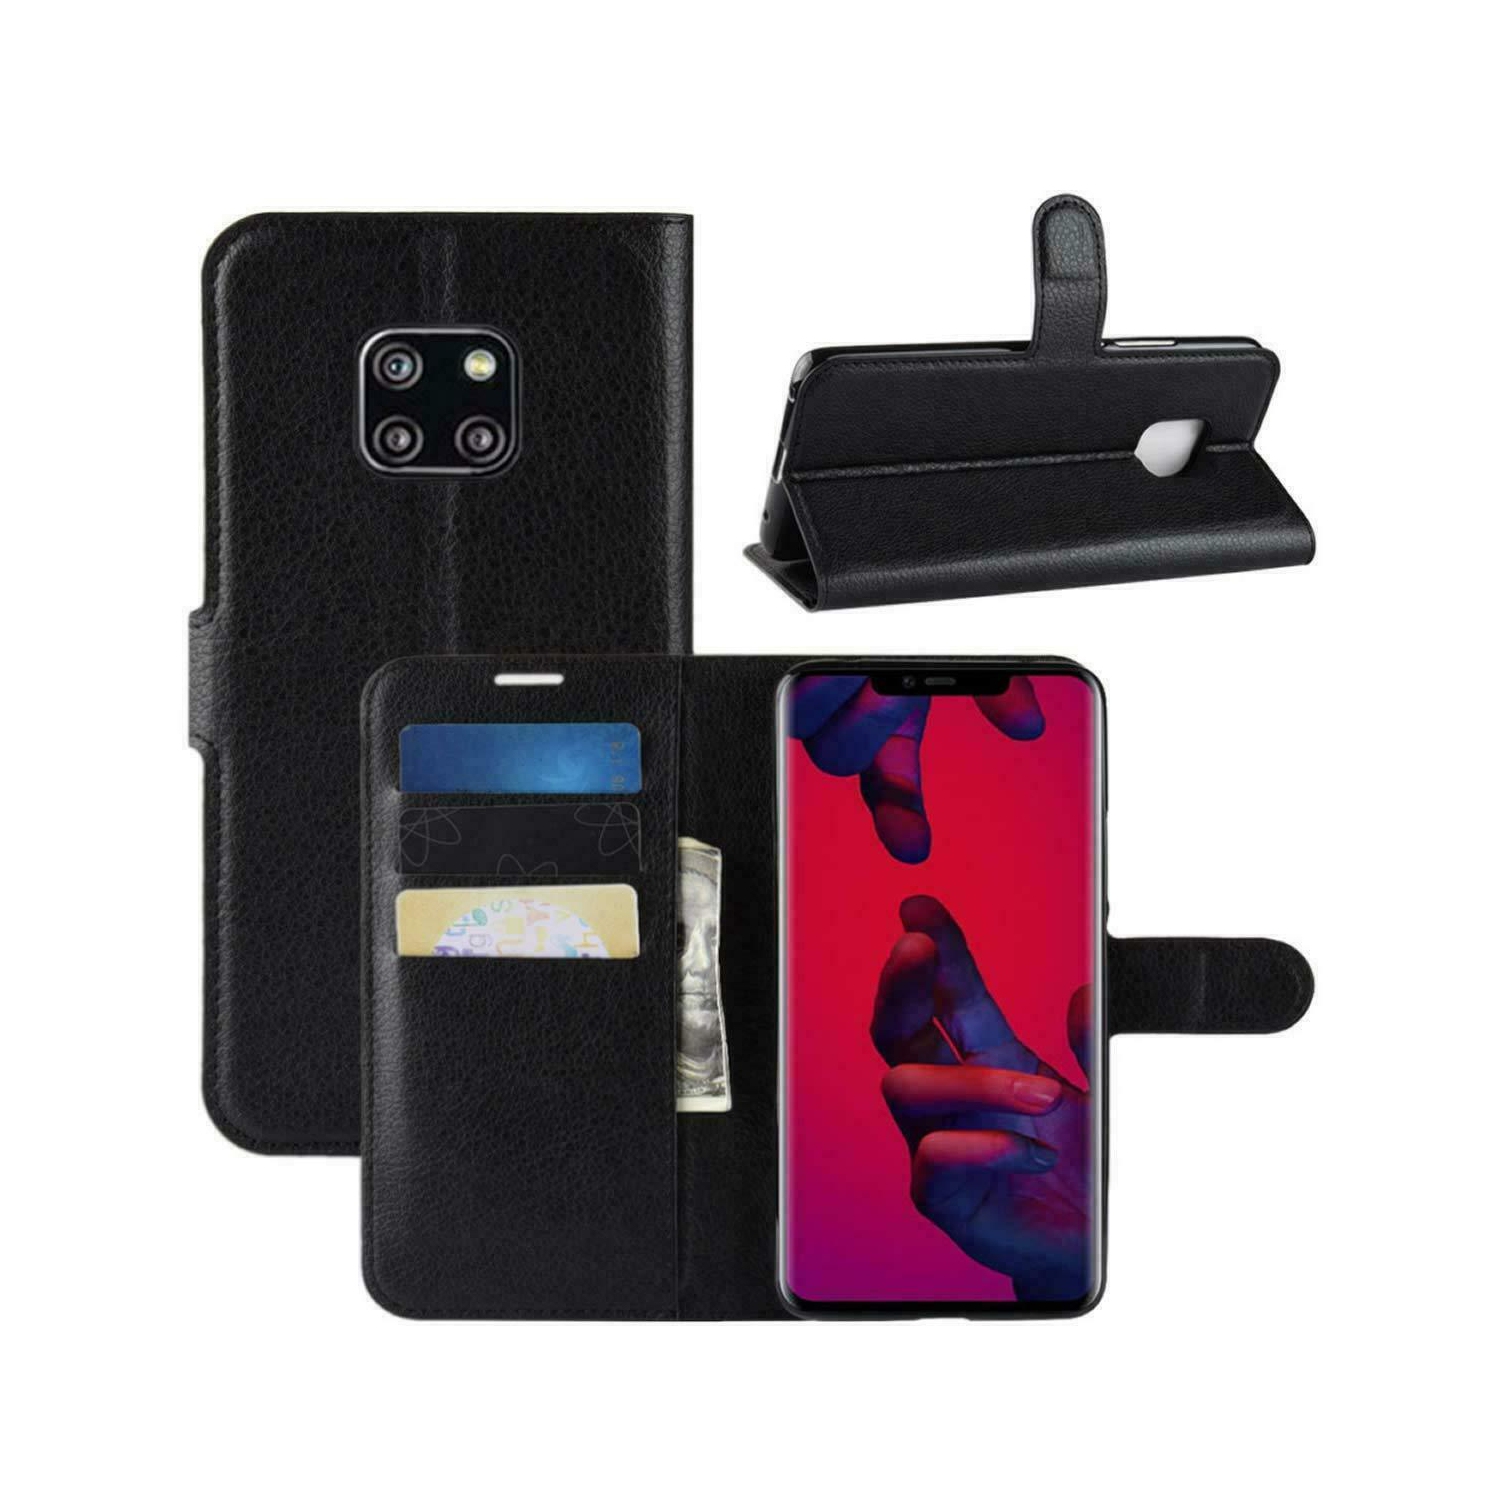 [CS] Huawei Mate 20 Pro Case, Magnetic Leather Folio Wallet Flip Case Cover with Card Slot, Black